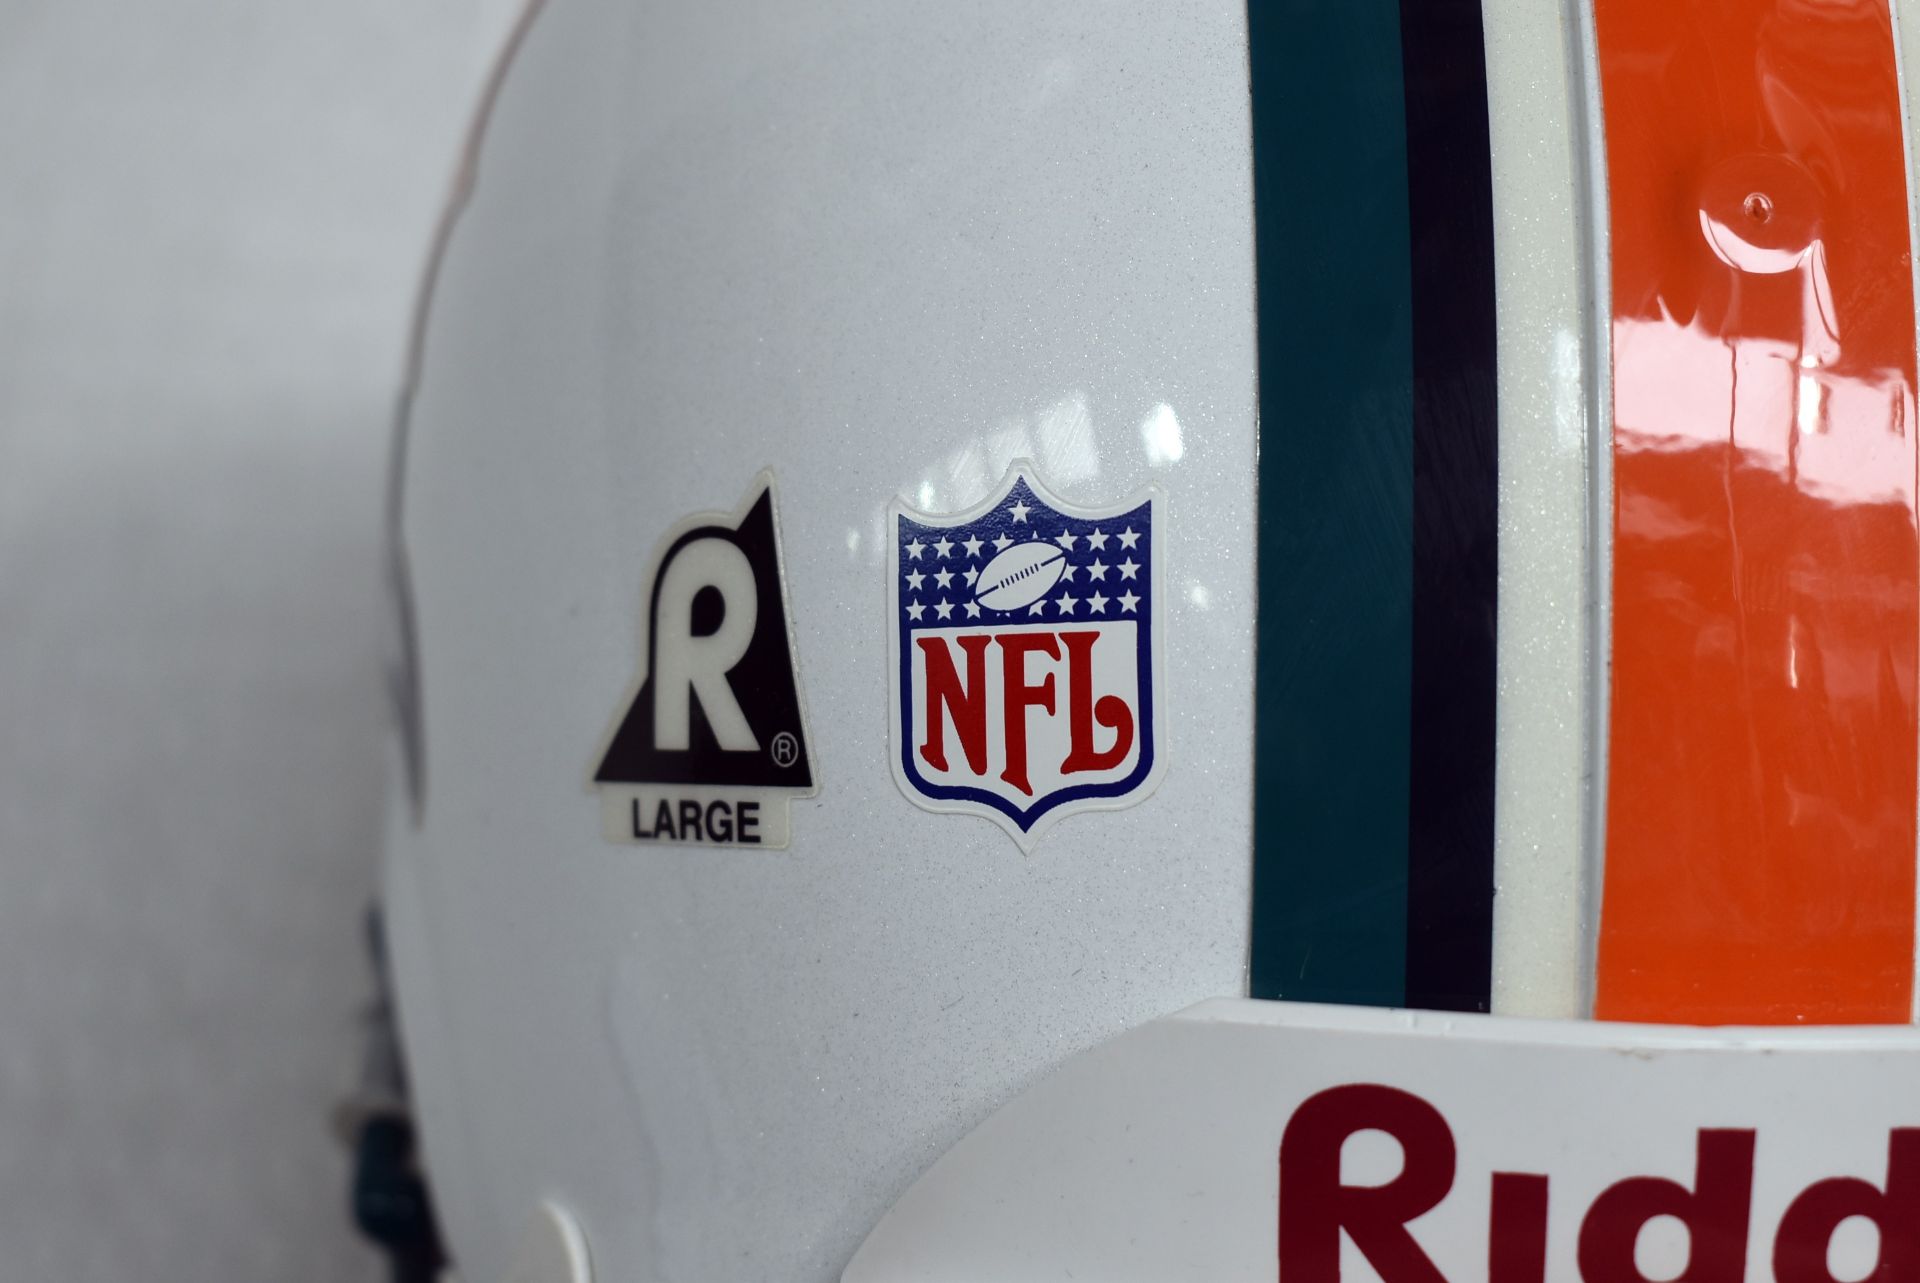 1 x Autographed Miami Dolphin's American Football Helmet, Signed By Quarterback DAN MARINO - Image 11 of 14